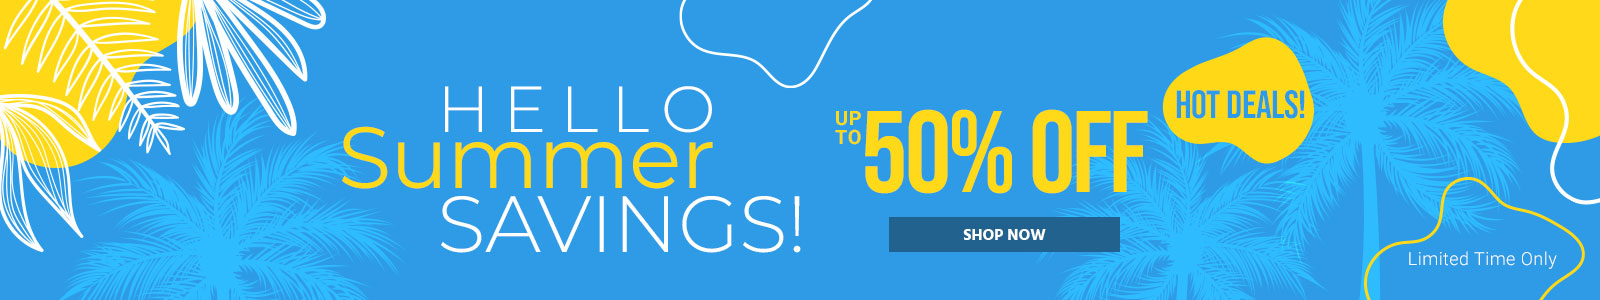 Hello Summer Savings!
Up to 50% off
Hot Deals!
Limited Time Only
Shop Now